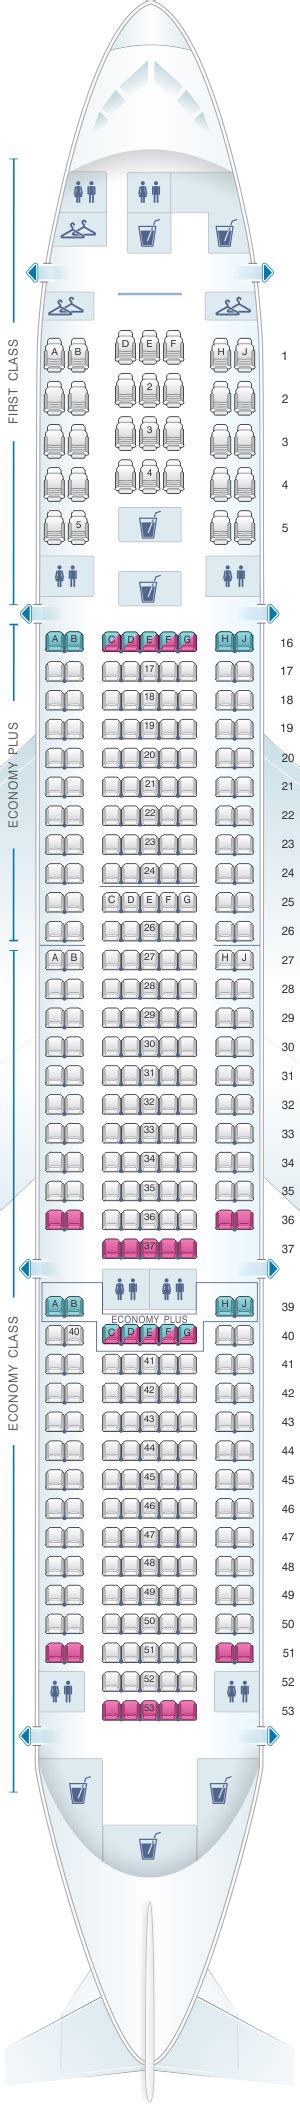 boeing 777 seating map united airlines